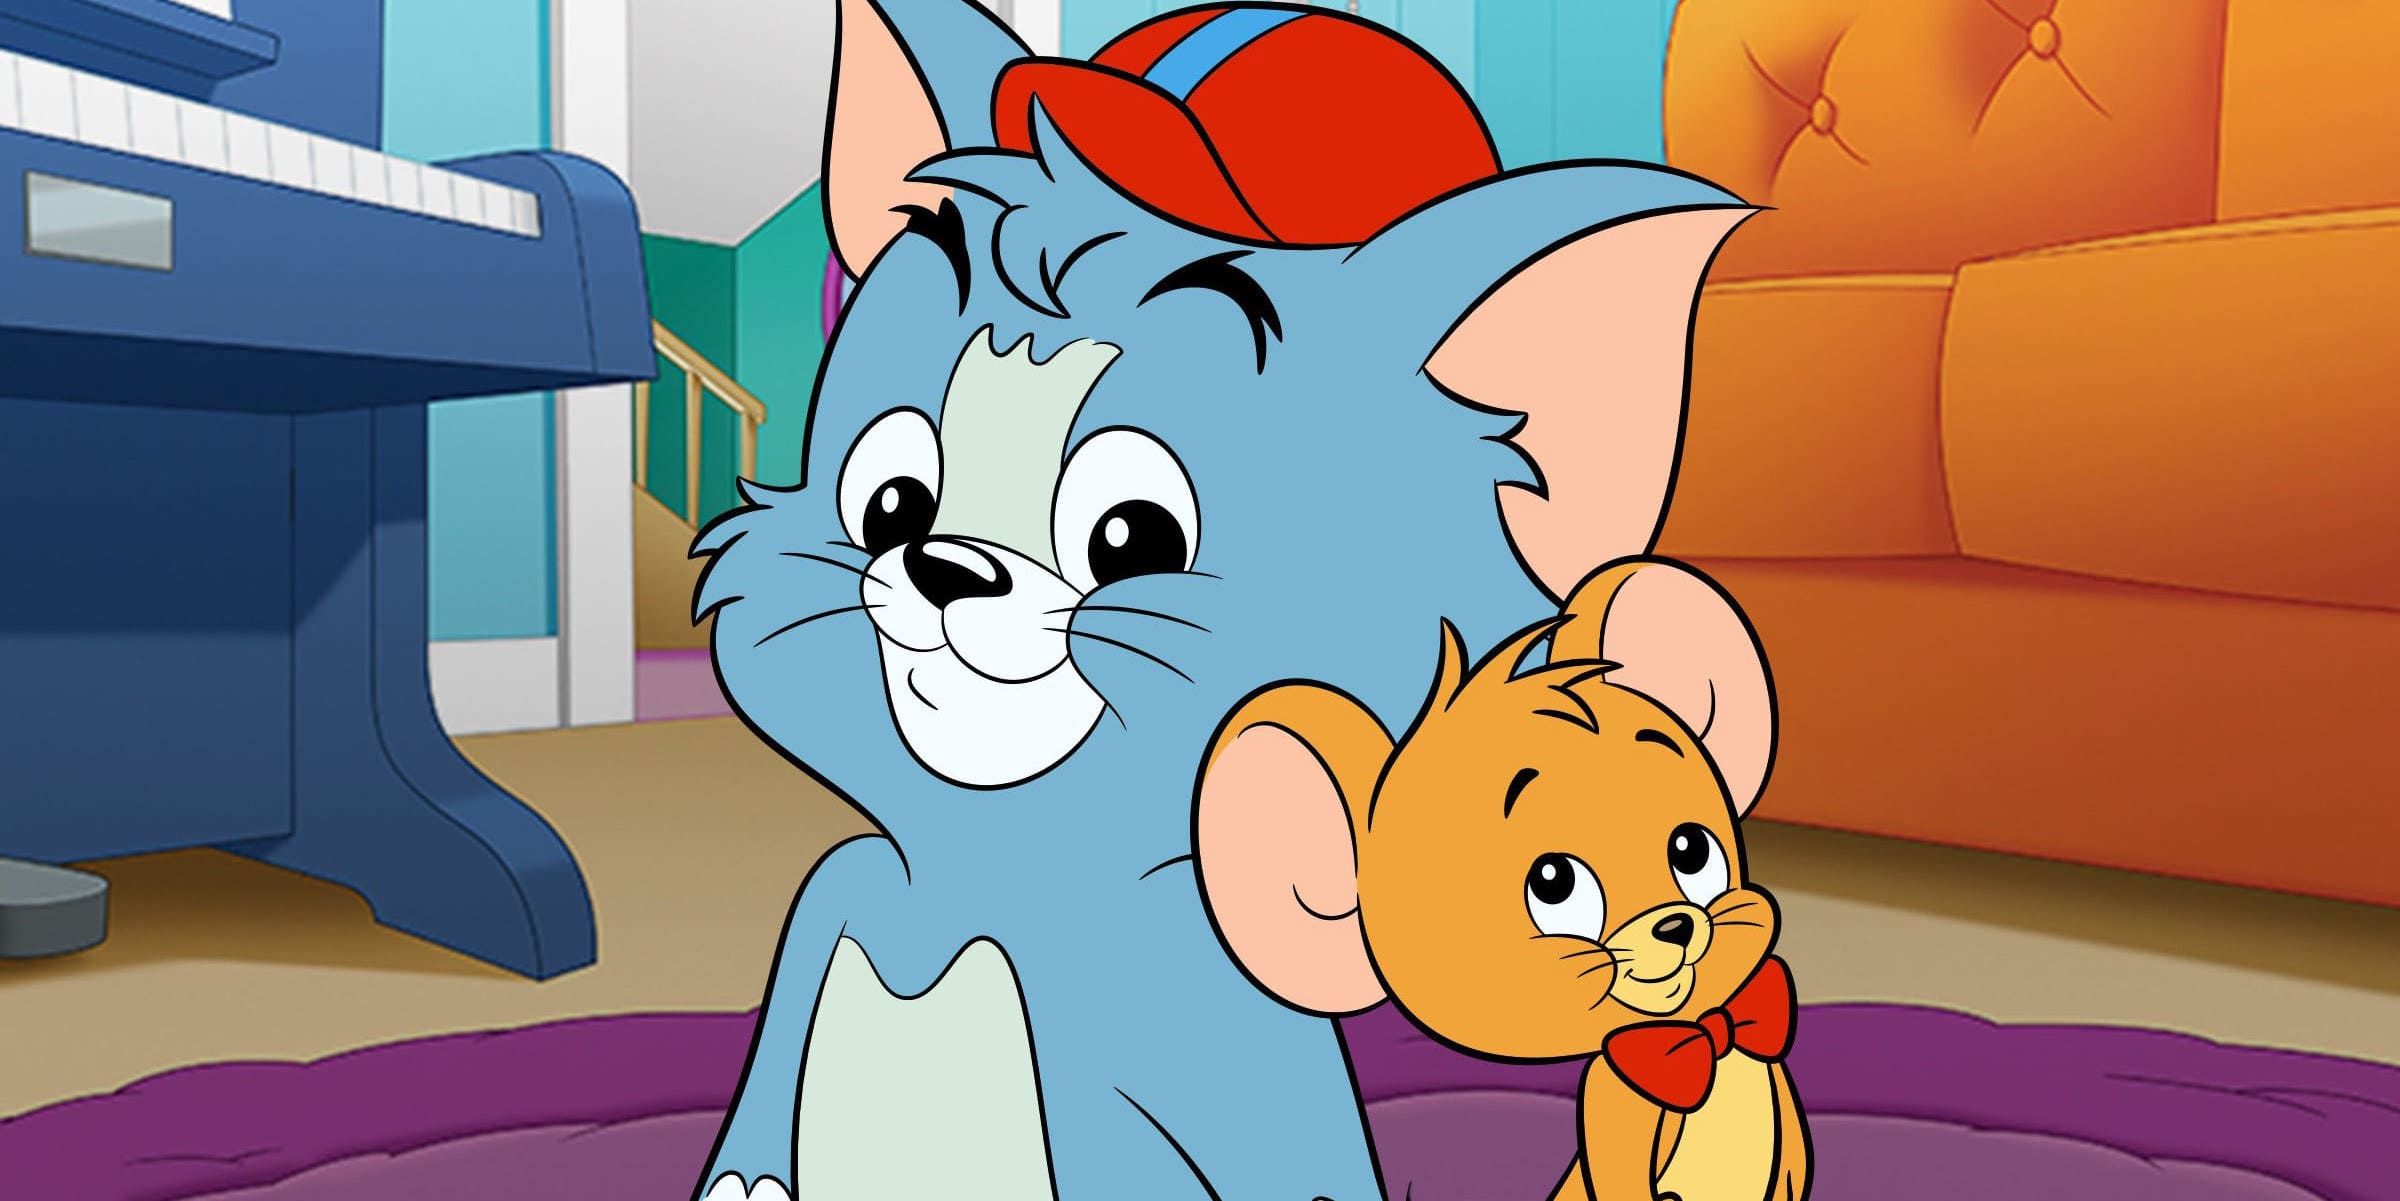 Tom and Jerry as kids